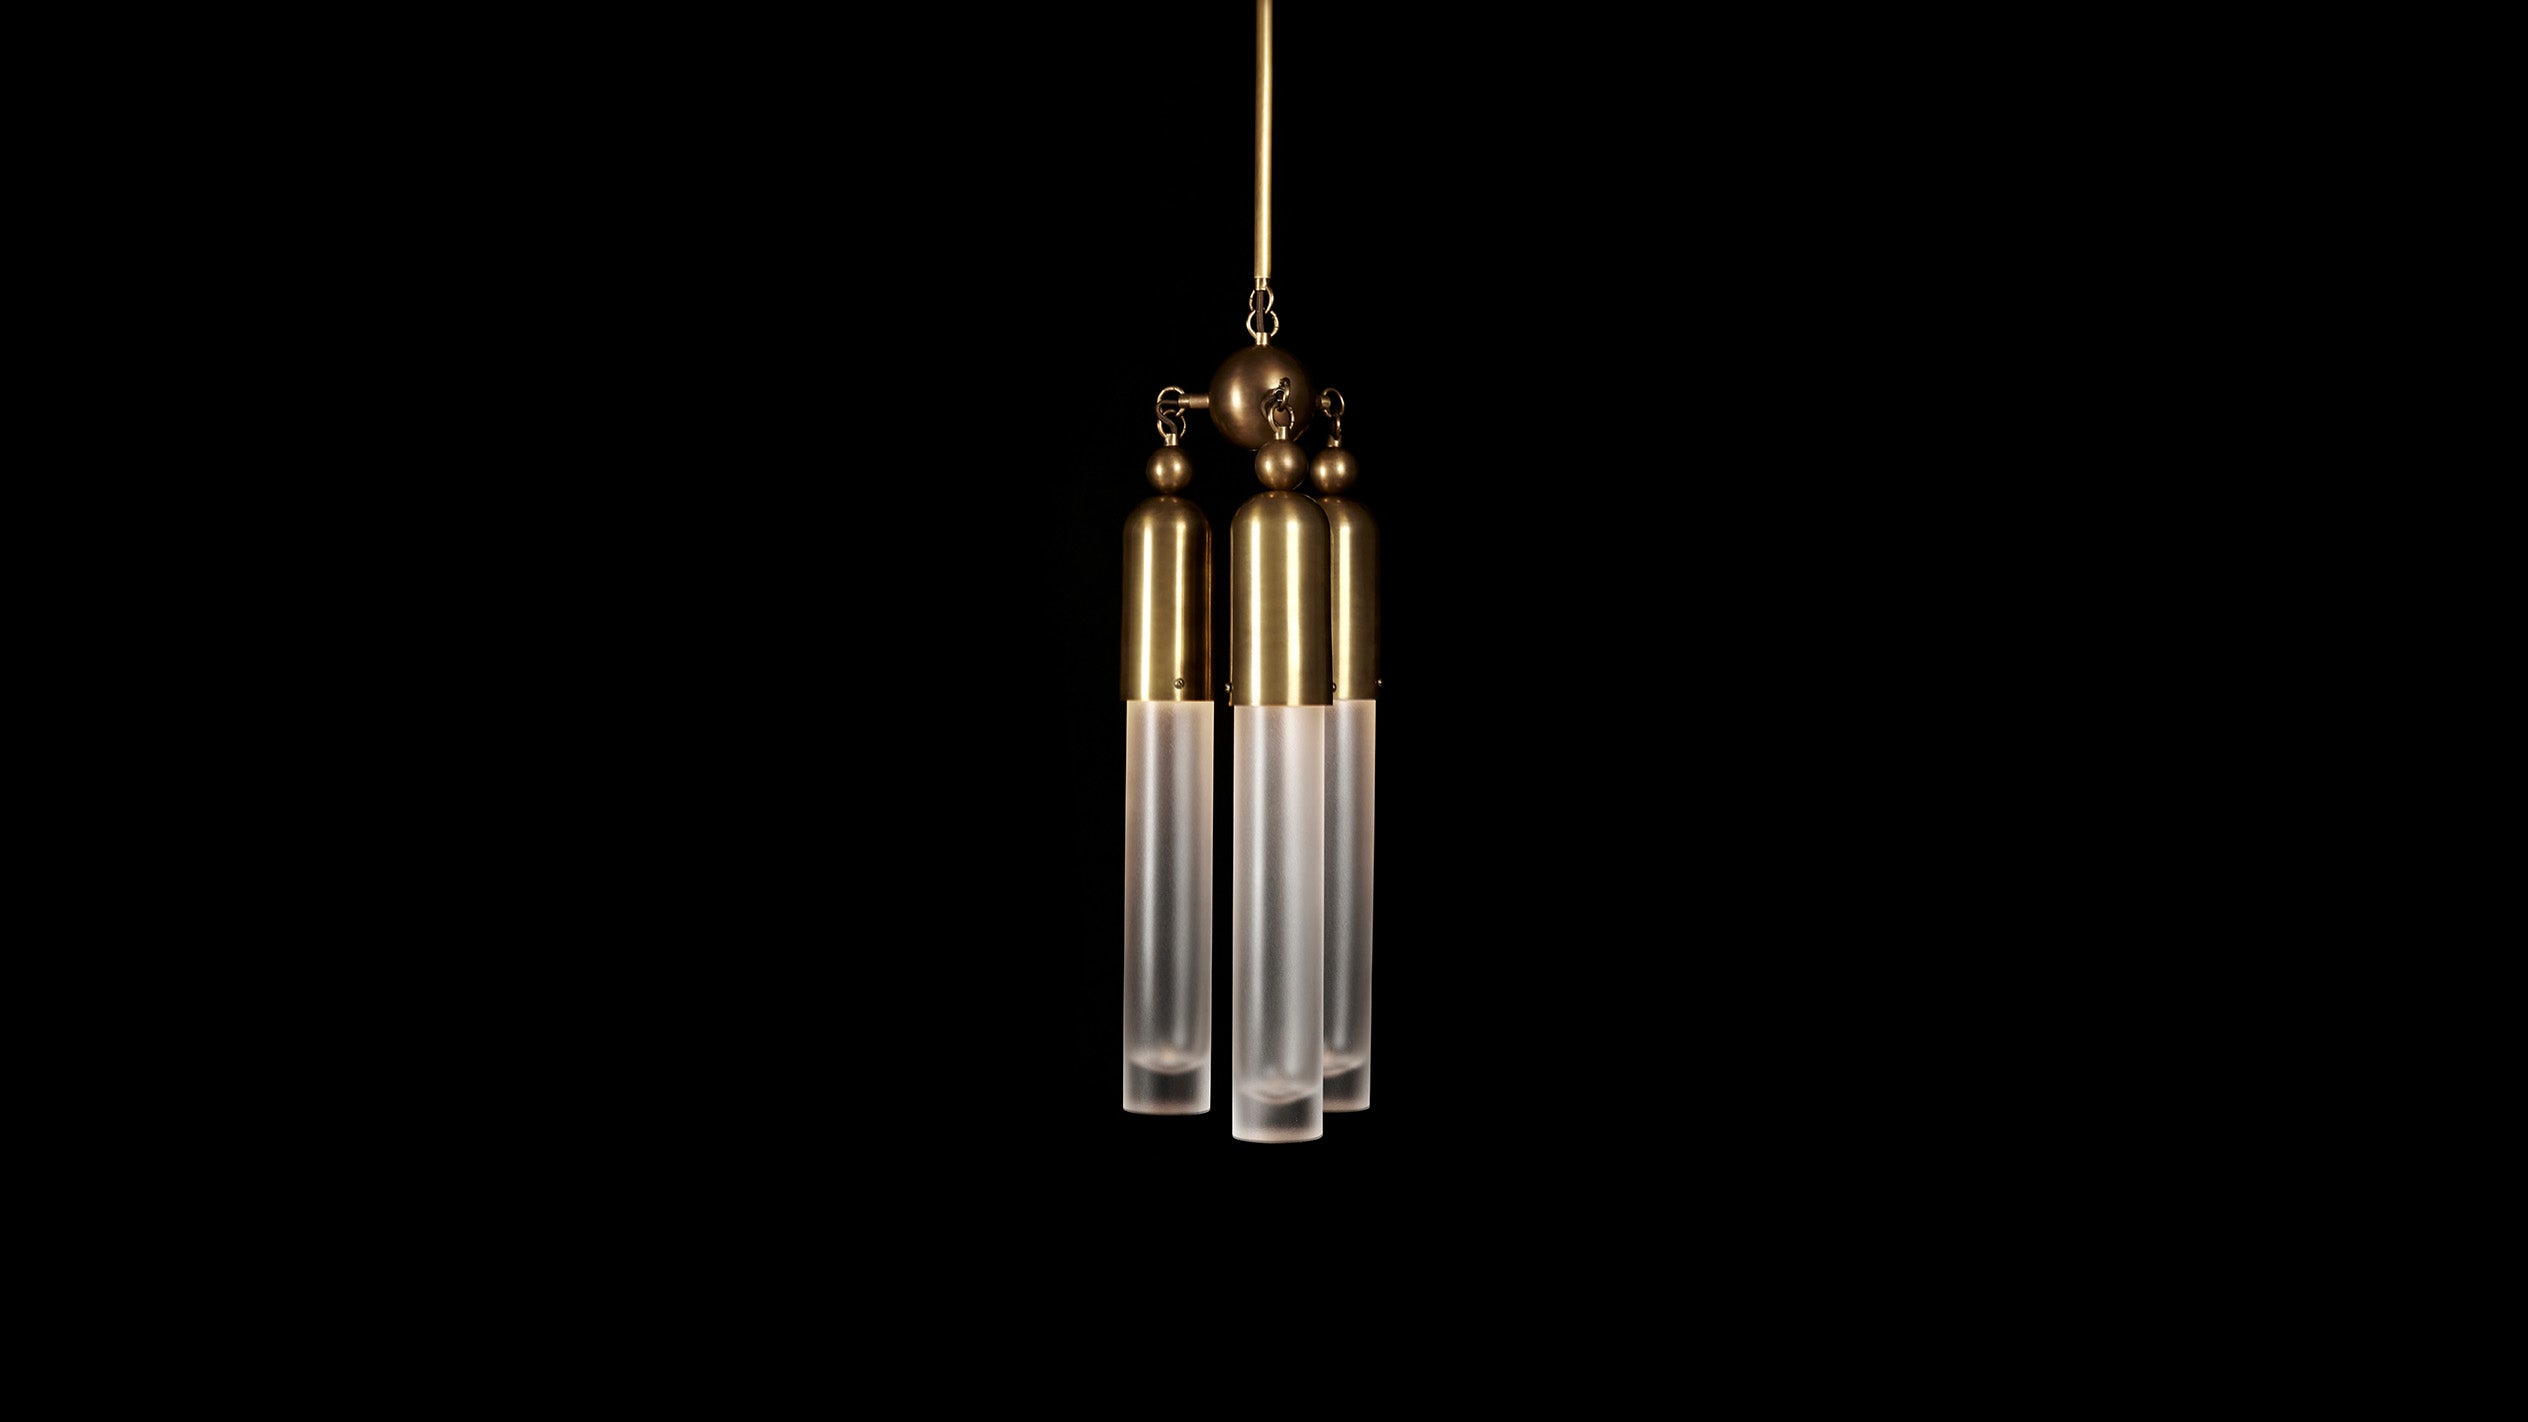 TASSEL : 3 ceiling pendant in Aged Brass finish, hanging against a black background. 